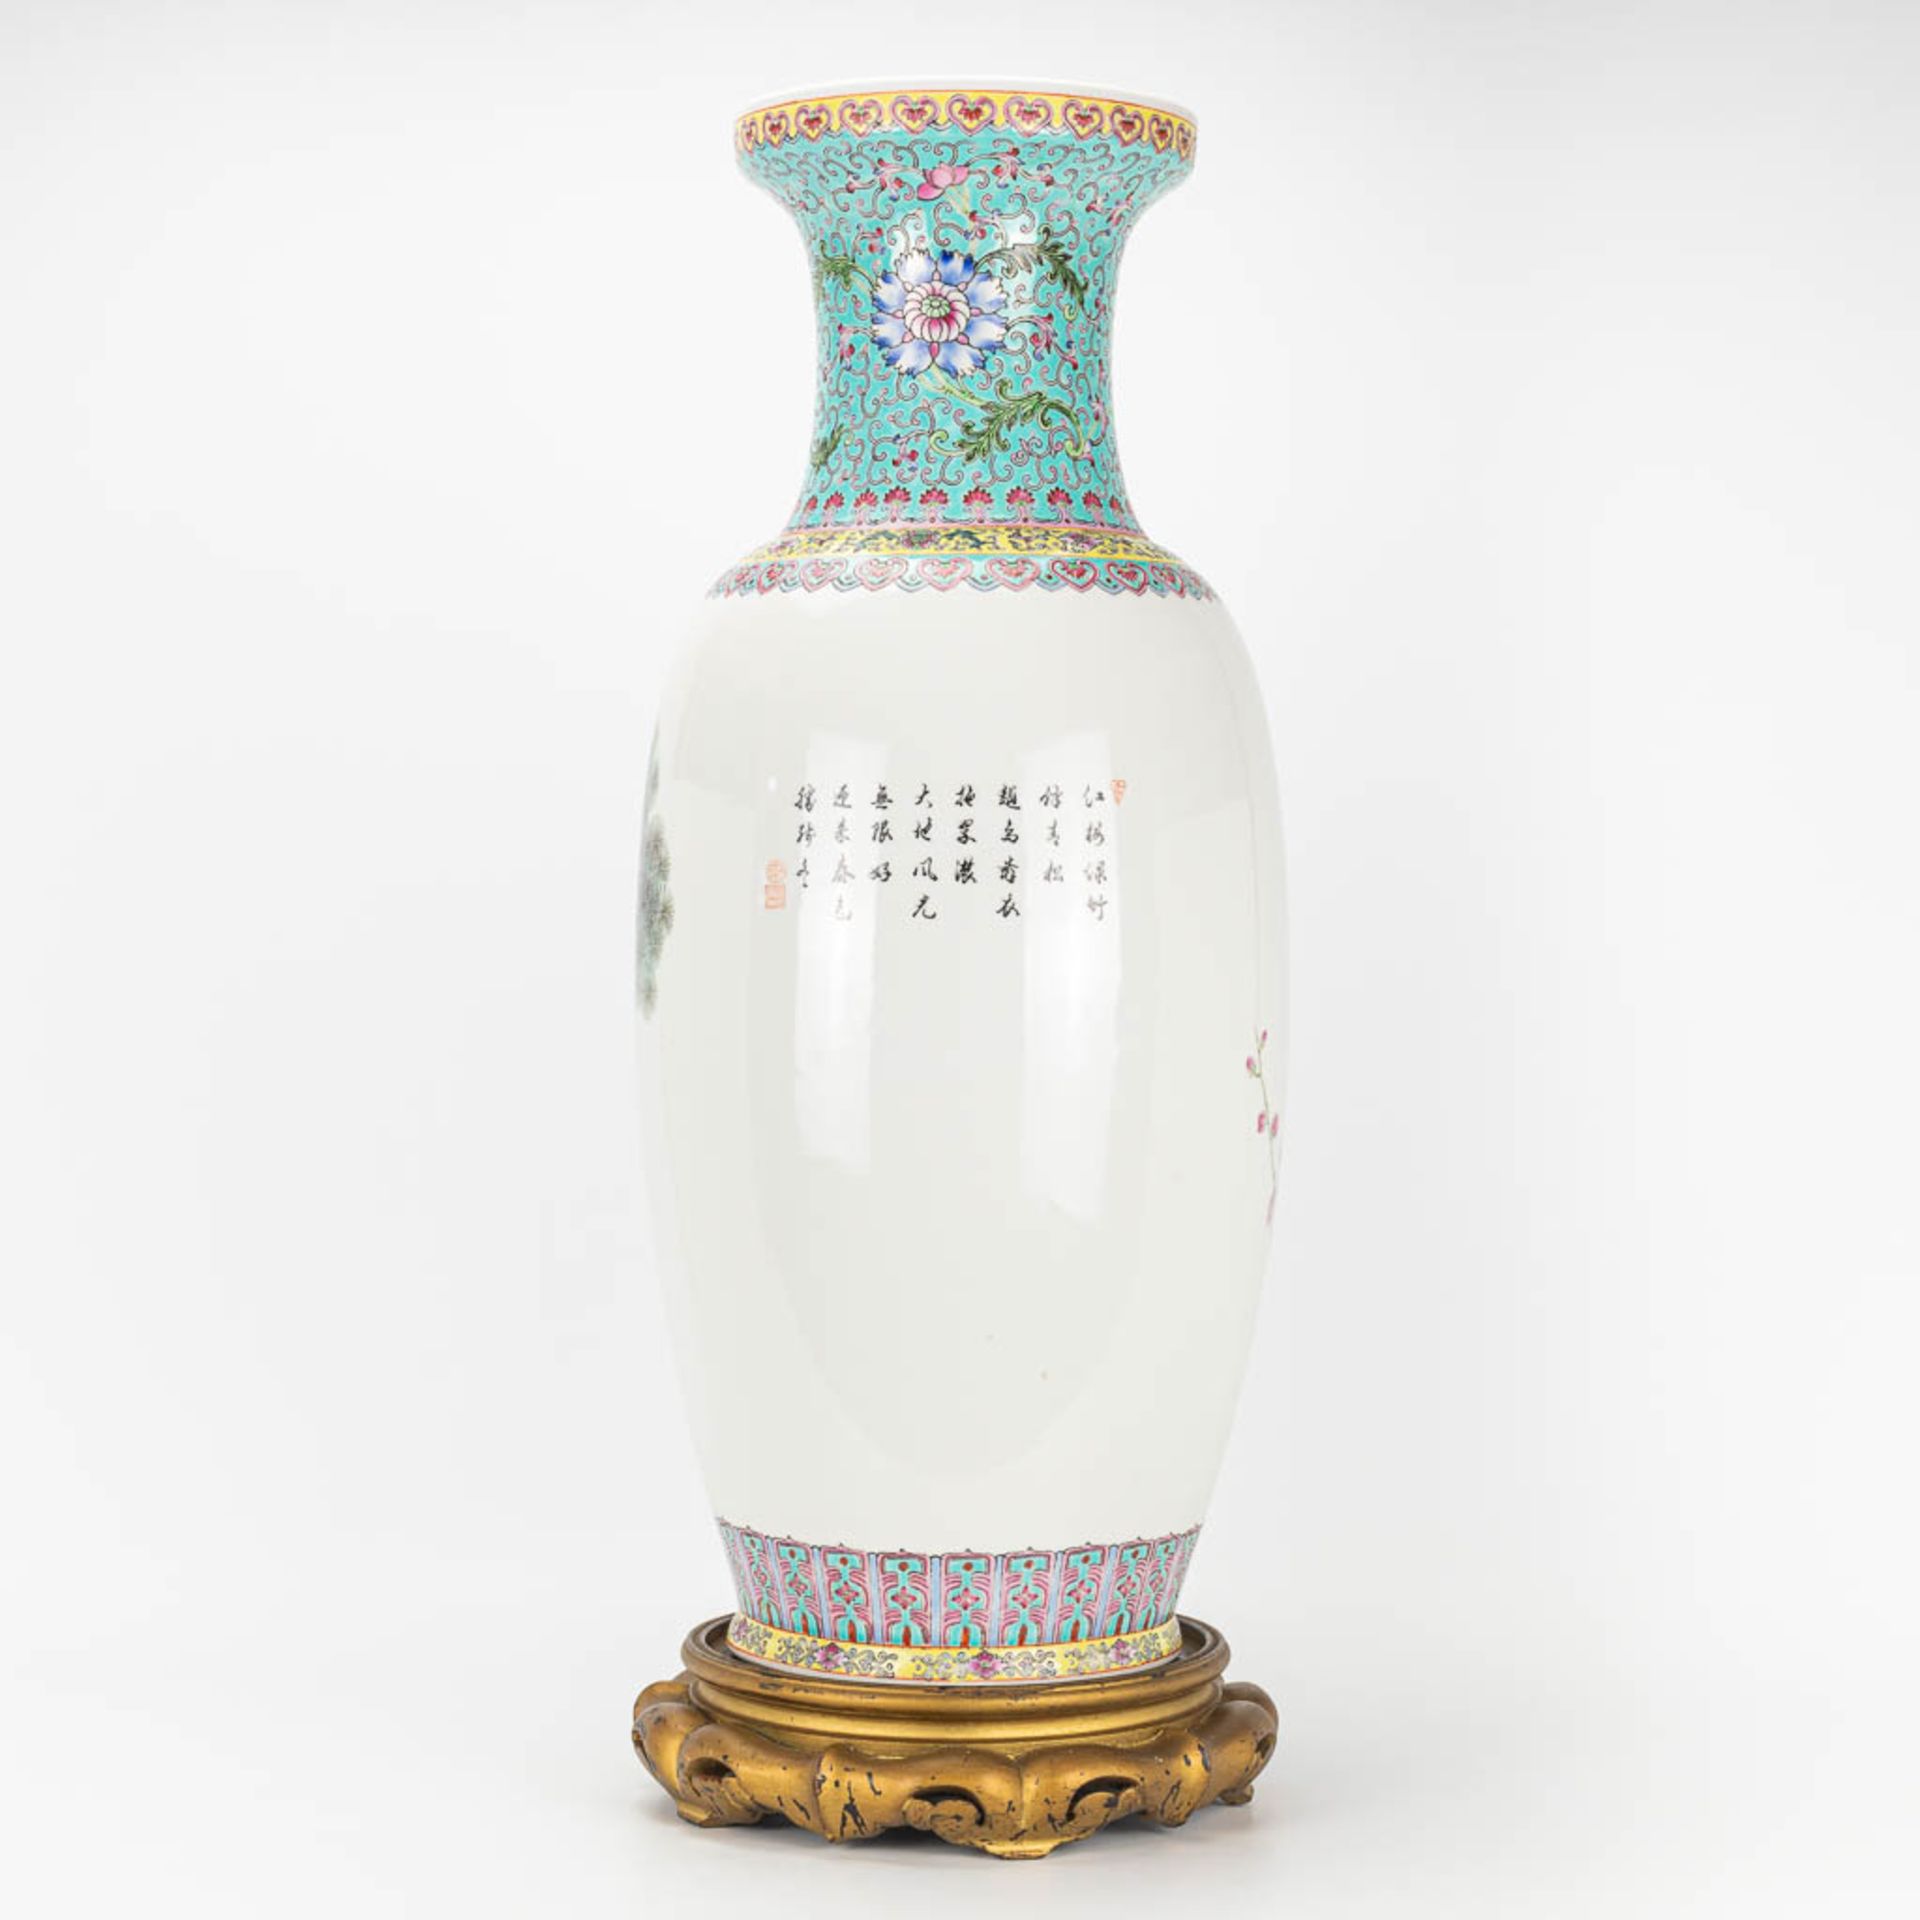 A vase made of Chinese porcelain and decorated with peacocks - Image 2 of 16